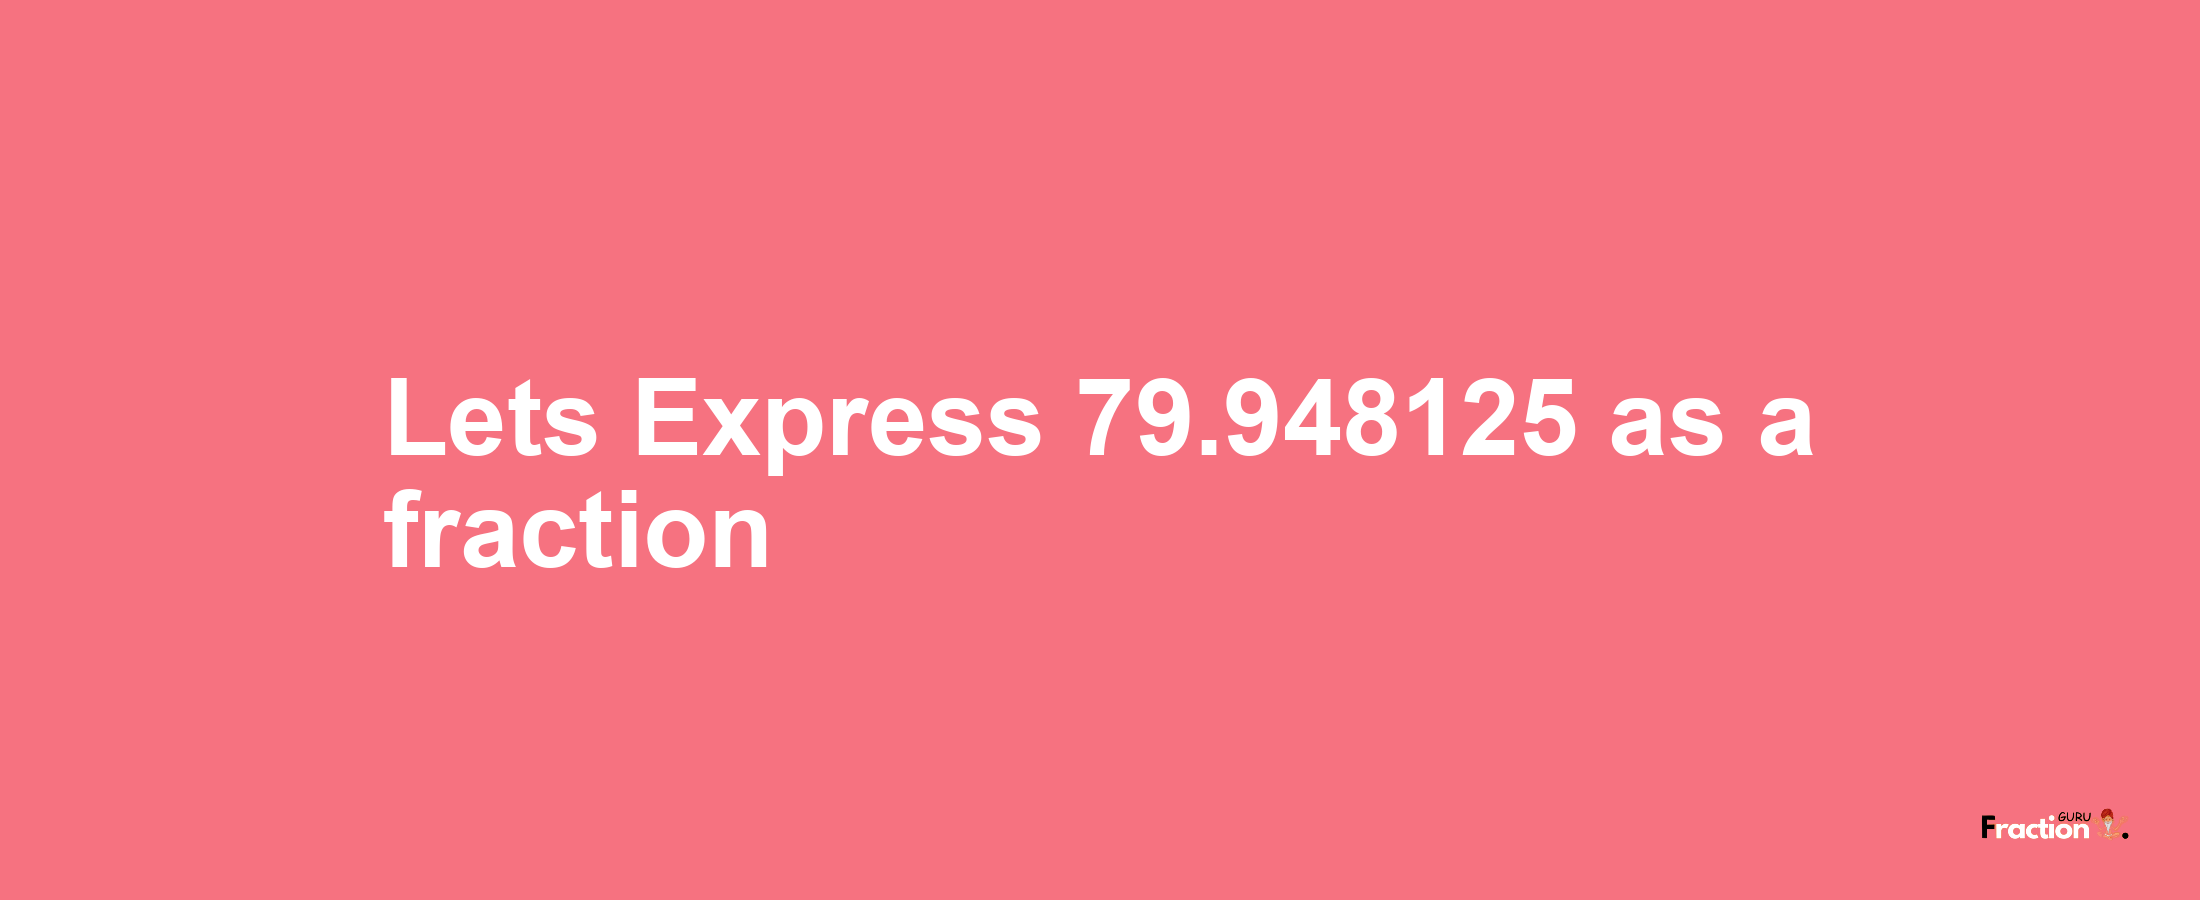 Lets Express 79.948125 as afraction